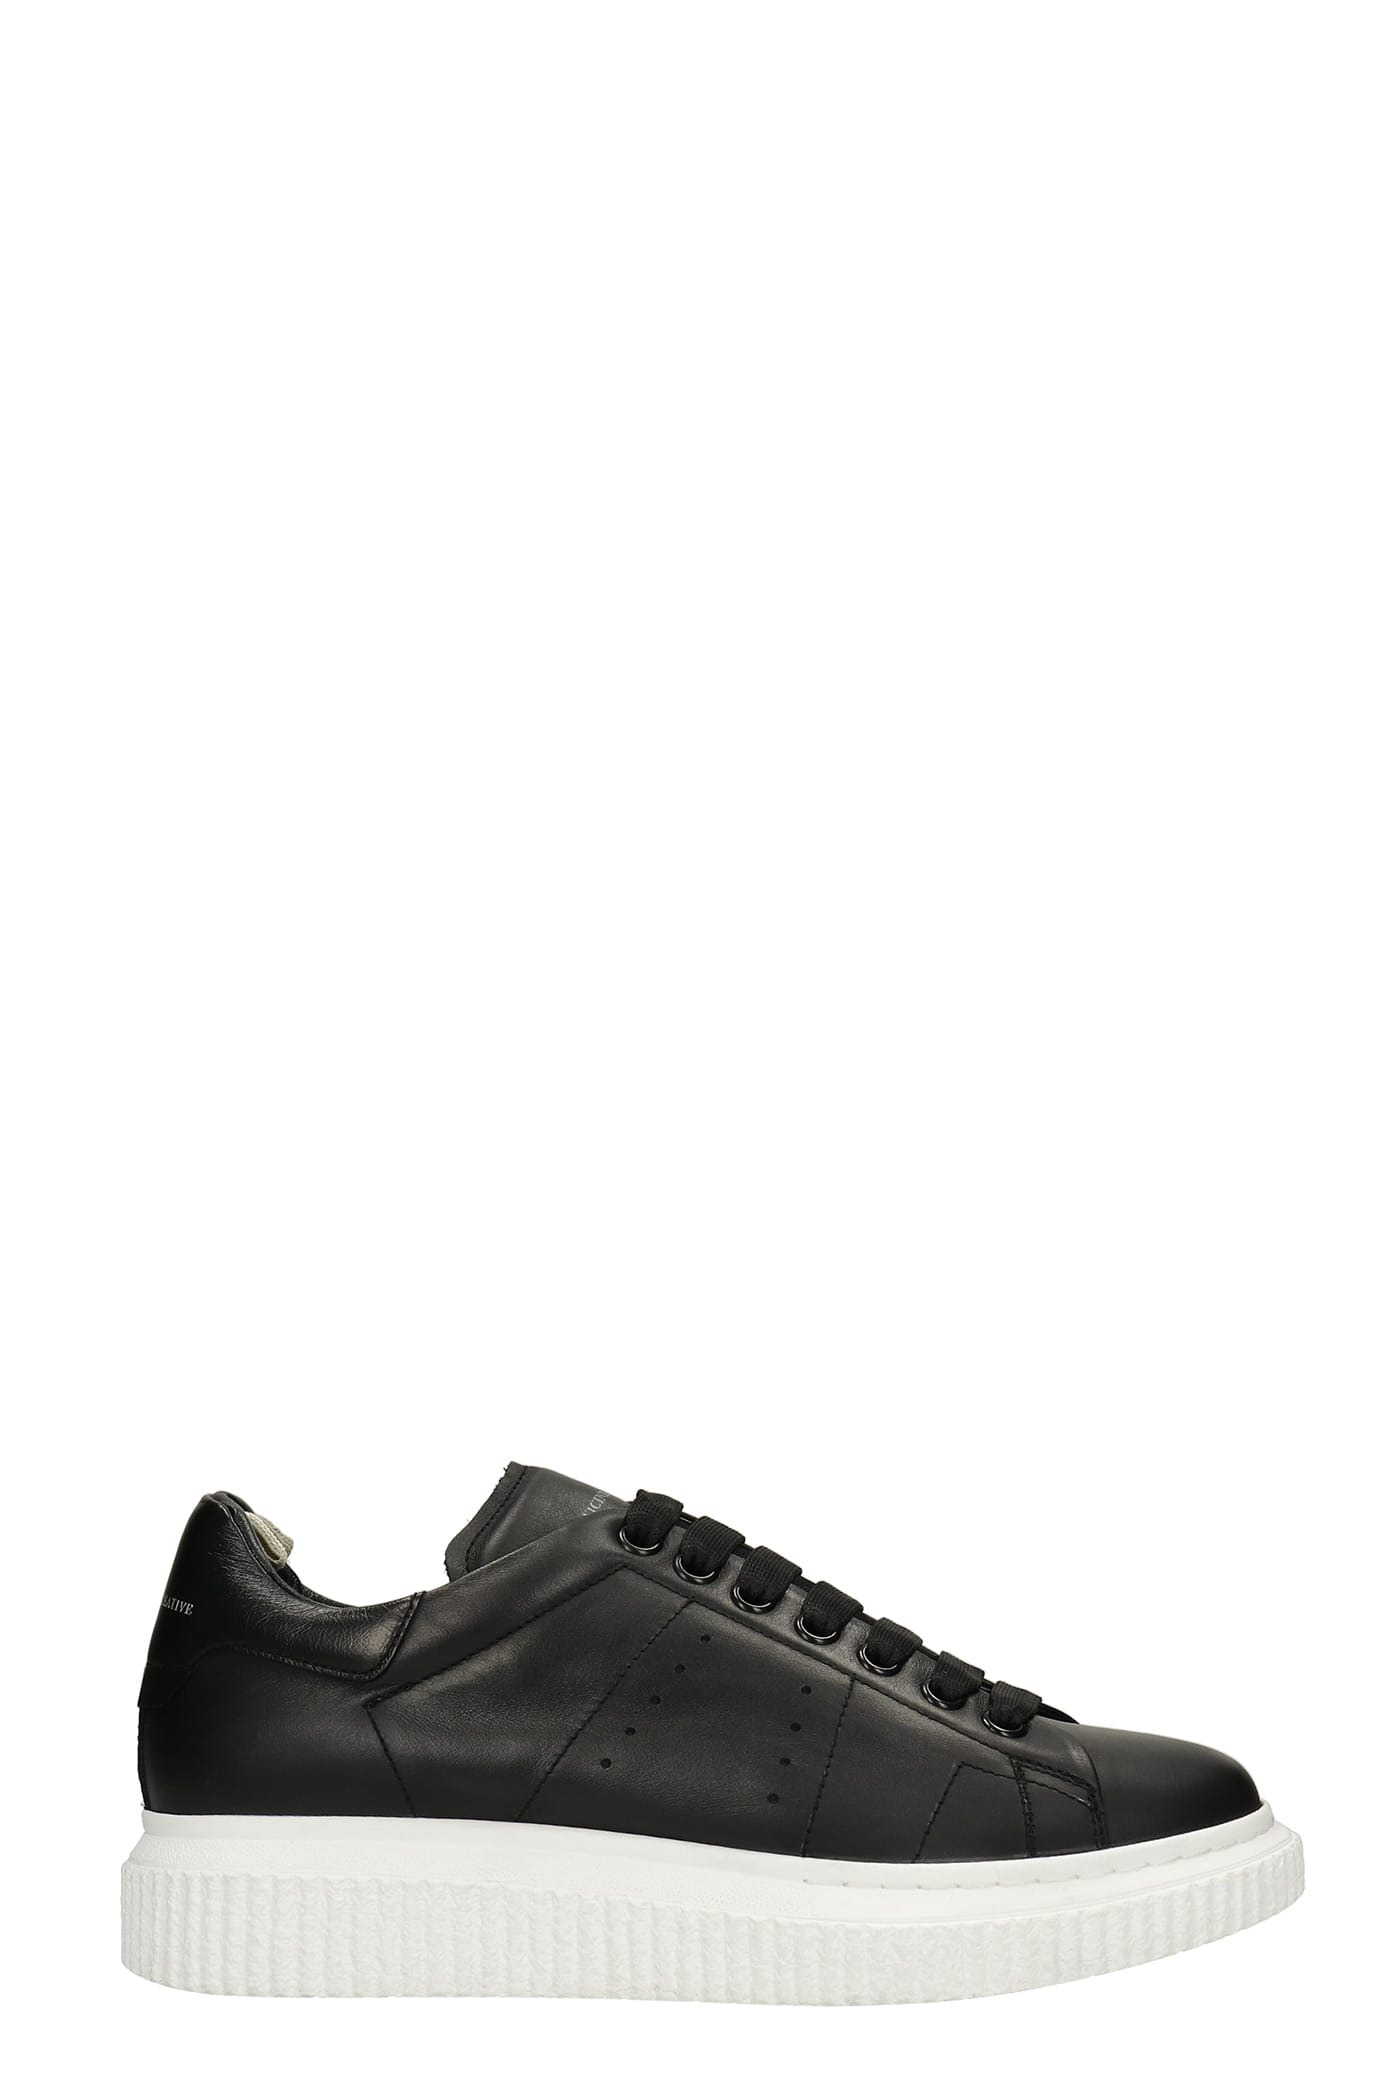 Officine Creative Krace 016 Sneakers In Black Leather